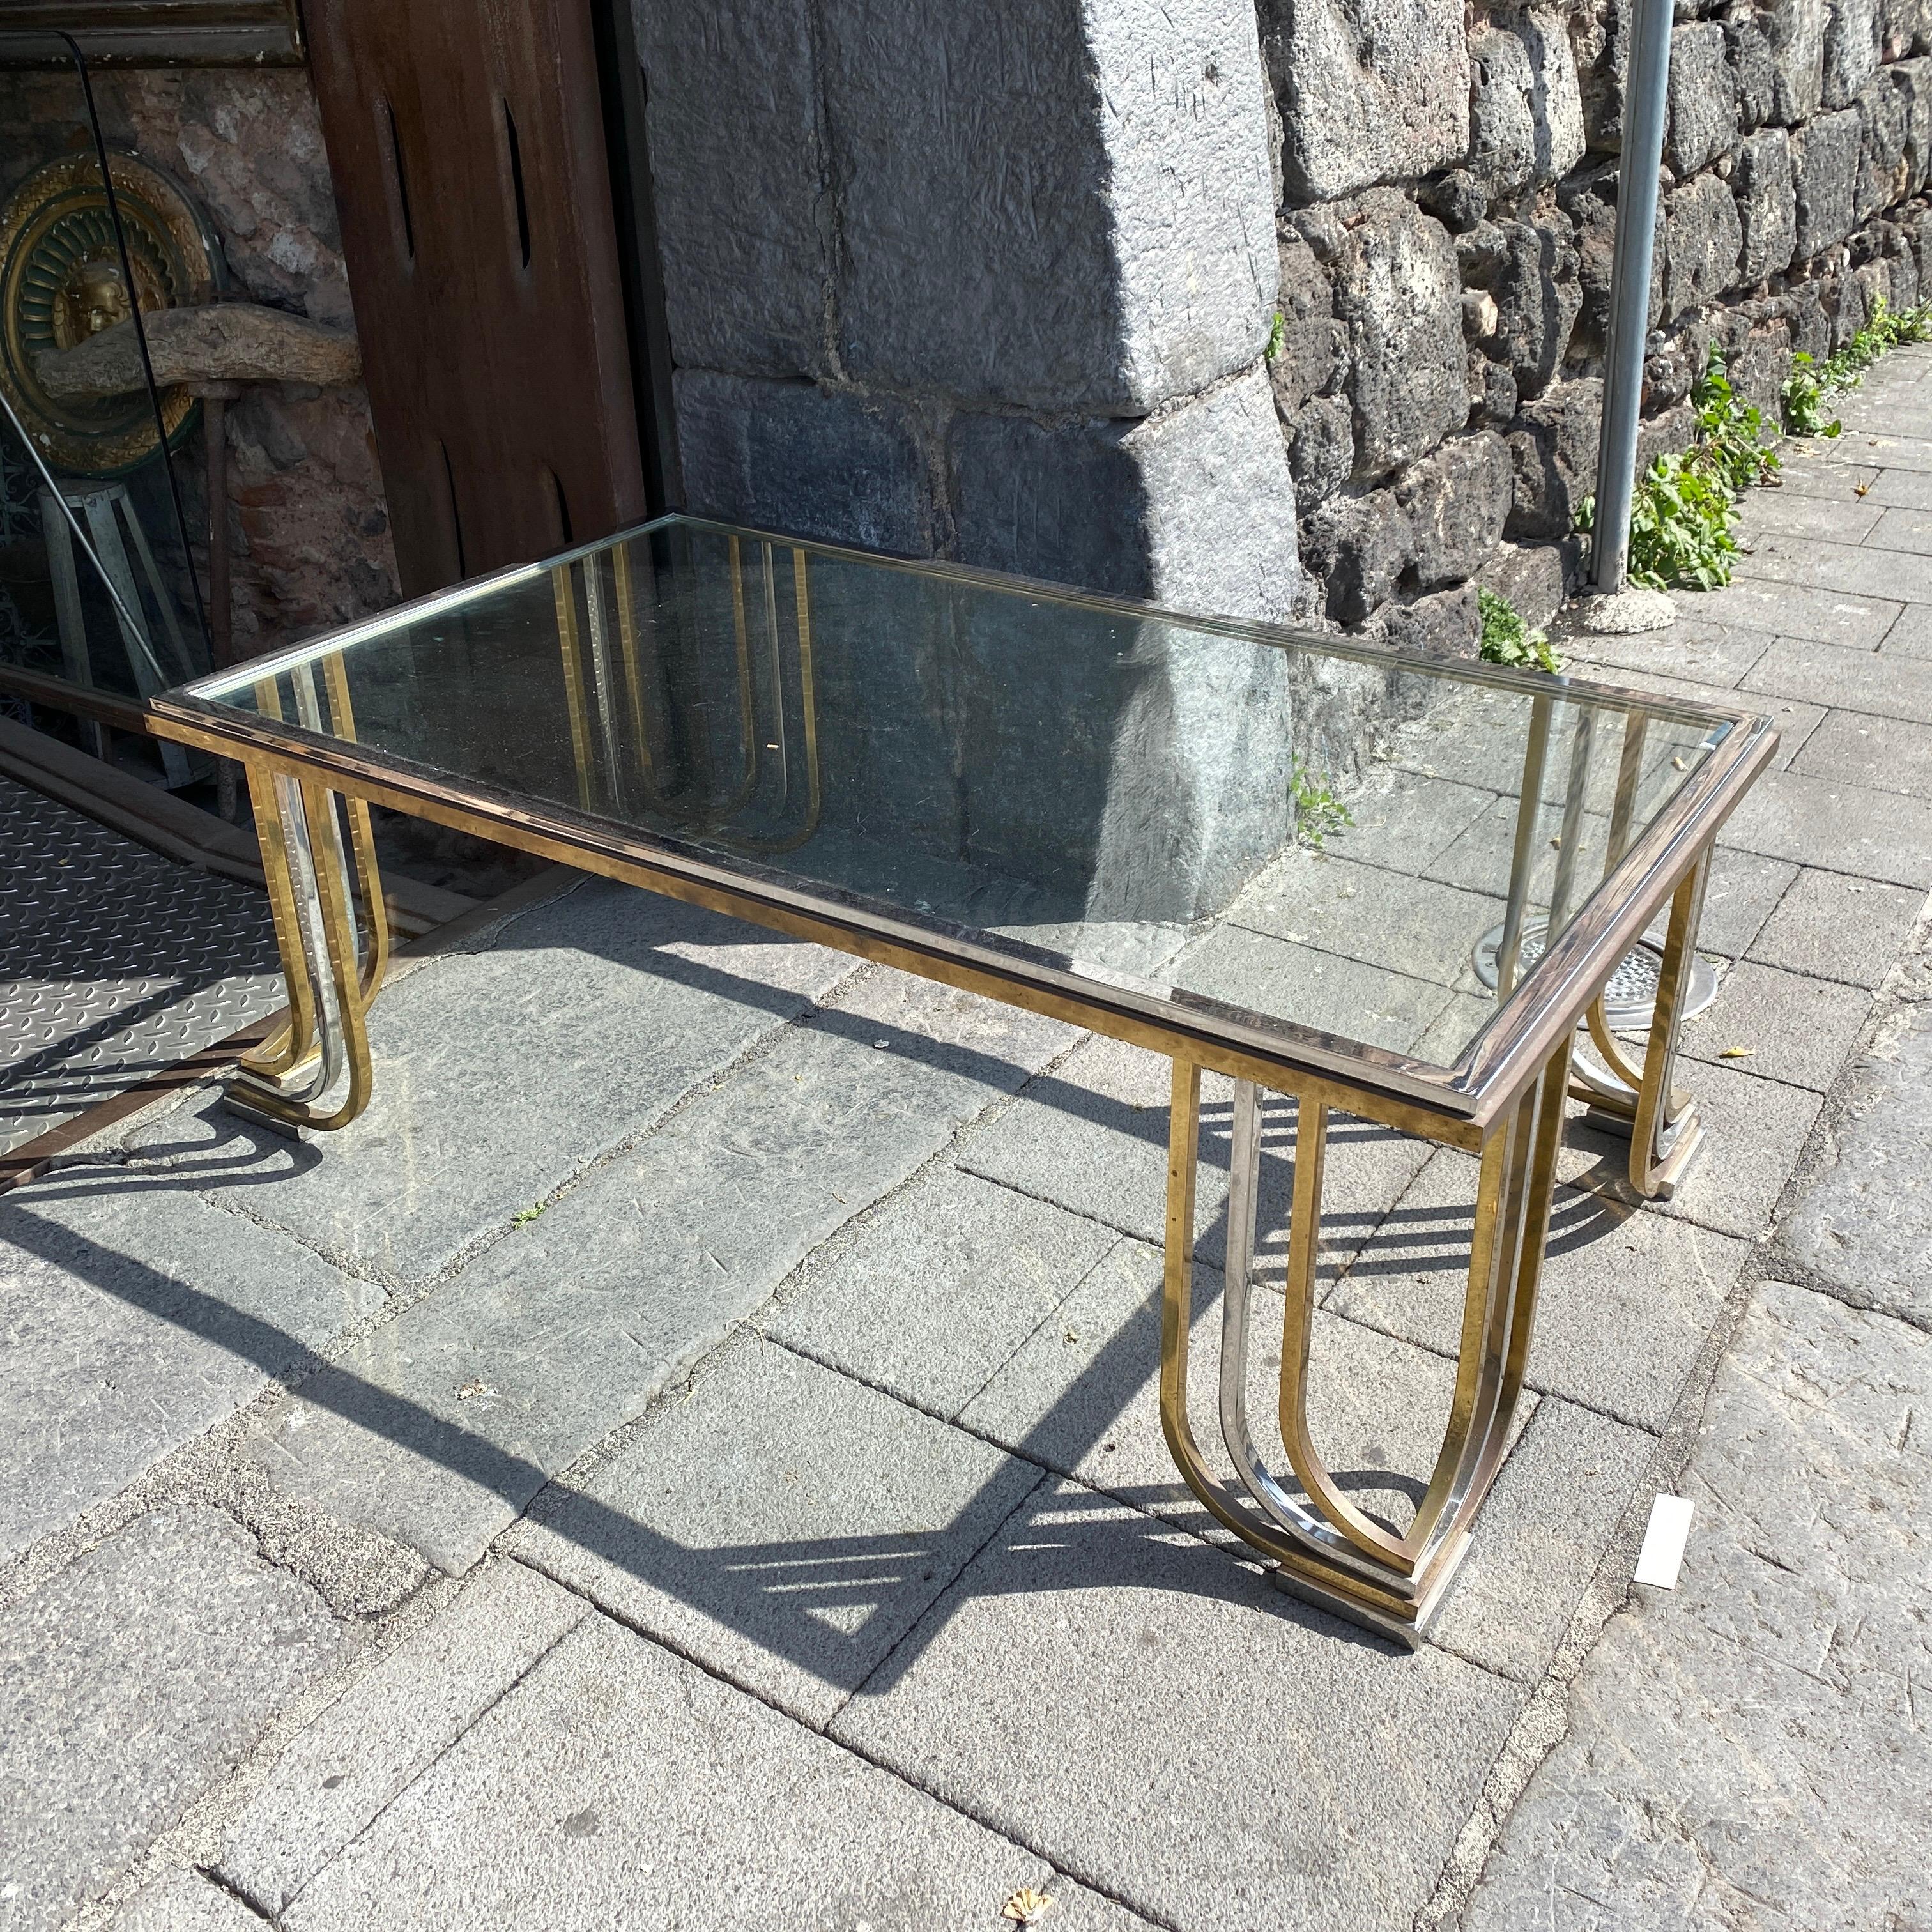 An Italian coffee table designed and manufactured in the 1970s by famous maker Banci Firenze, very good conditions, brass is in original patina, chromed metal in very good conditions. Only a small chip on the glass visible in the last photo.